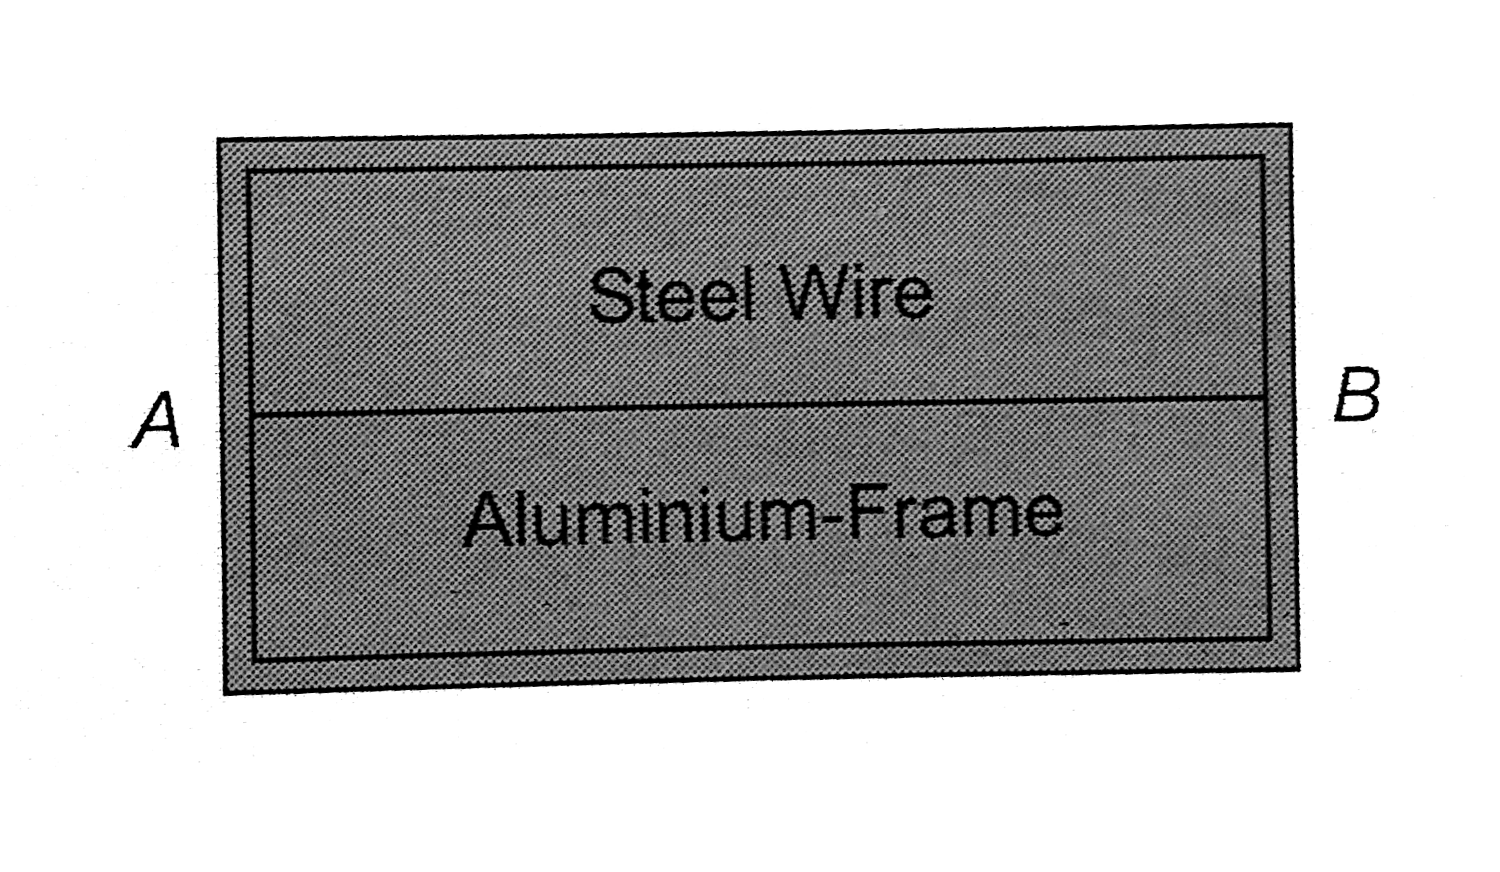 A steel wire AB of length 85cm at 10^(@)C is fixed rigidly at points A and B in an aluminium frame as shown. If the temperature of the system is raised to 110^(@)C , what extra stress will be produced in the wire relative to aluminium frame. Assume that coefficient of linear expansion for aluminium and steel are 23xx10^(-6)//^(@)C and 11xx10^(-6)//^(@)C respectively and Young's moduls for steel is 2xx10^(11) pa.